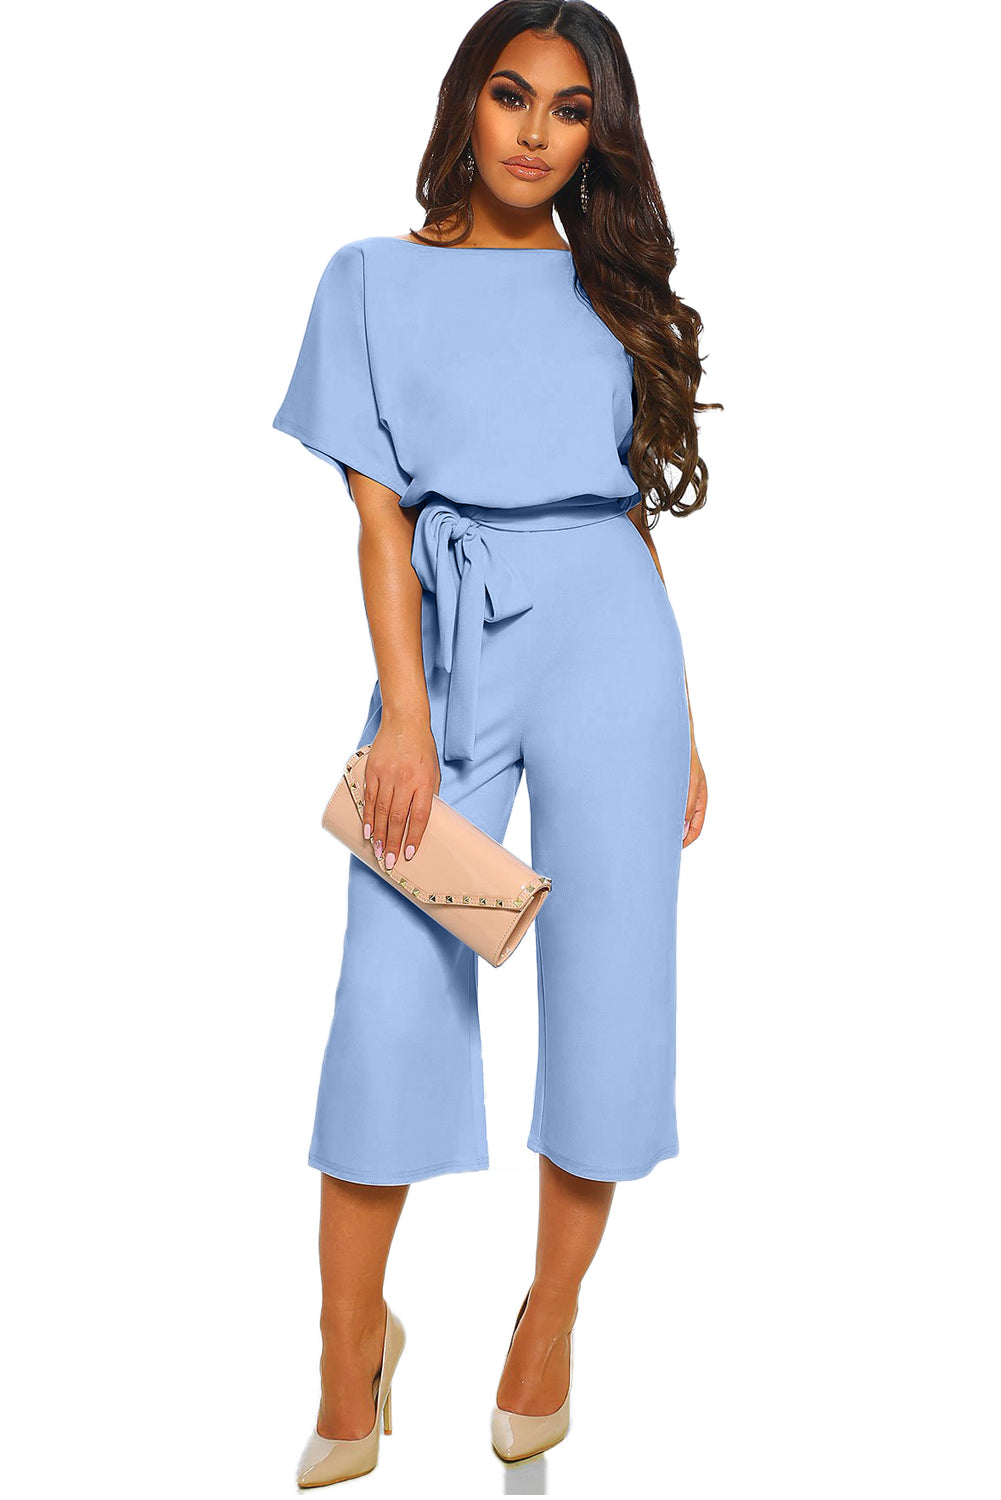 Sky Blue Always Chic Belted Culotte Jumpsuit